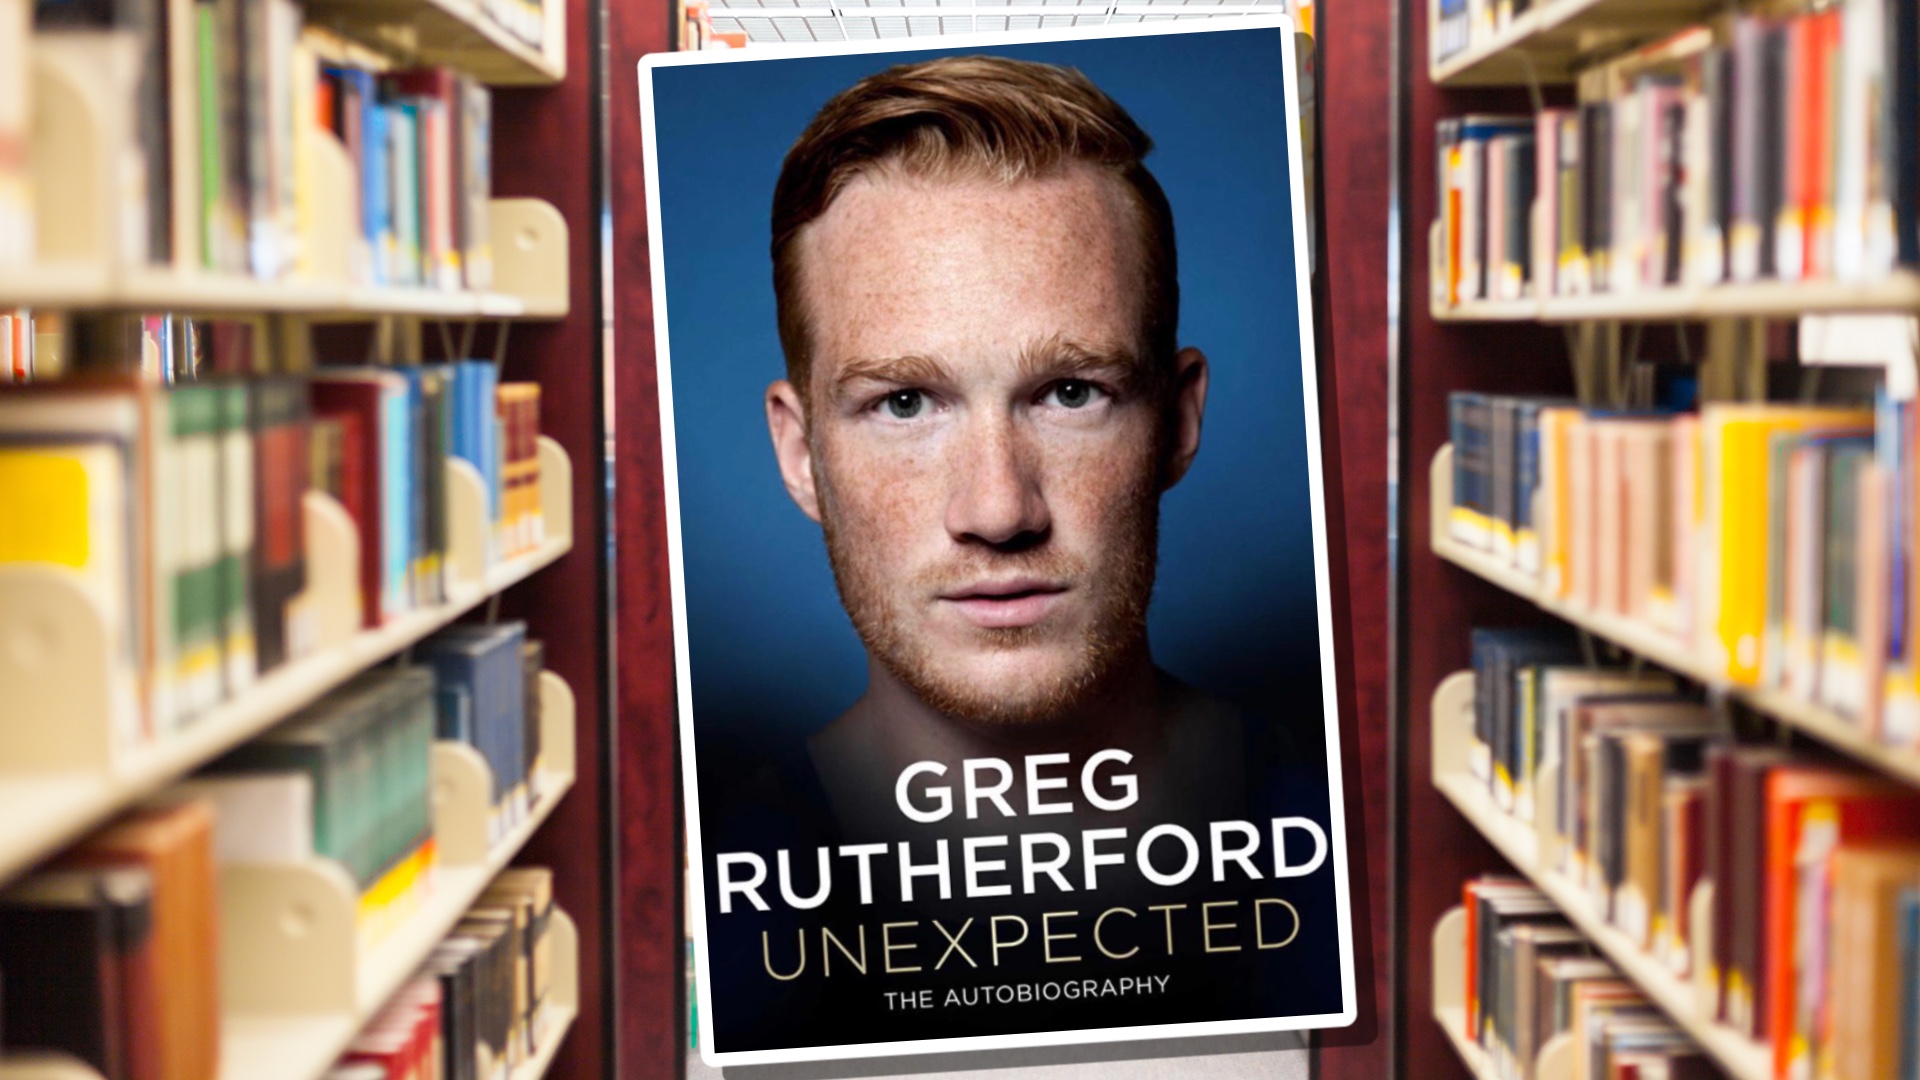 Greg Rutherford’s autobiography Unexpected